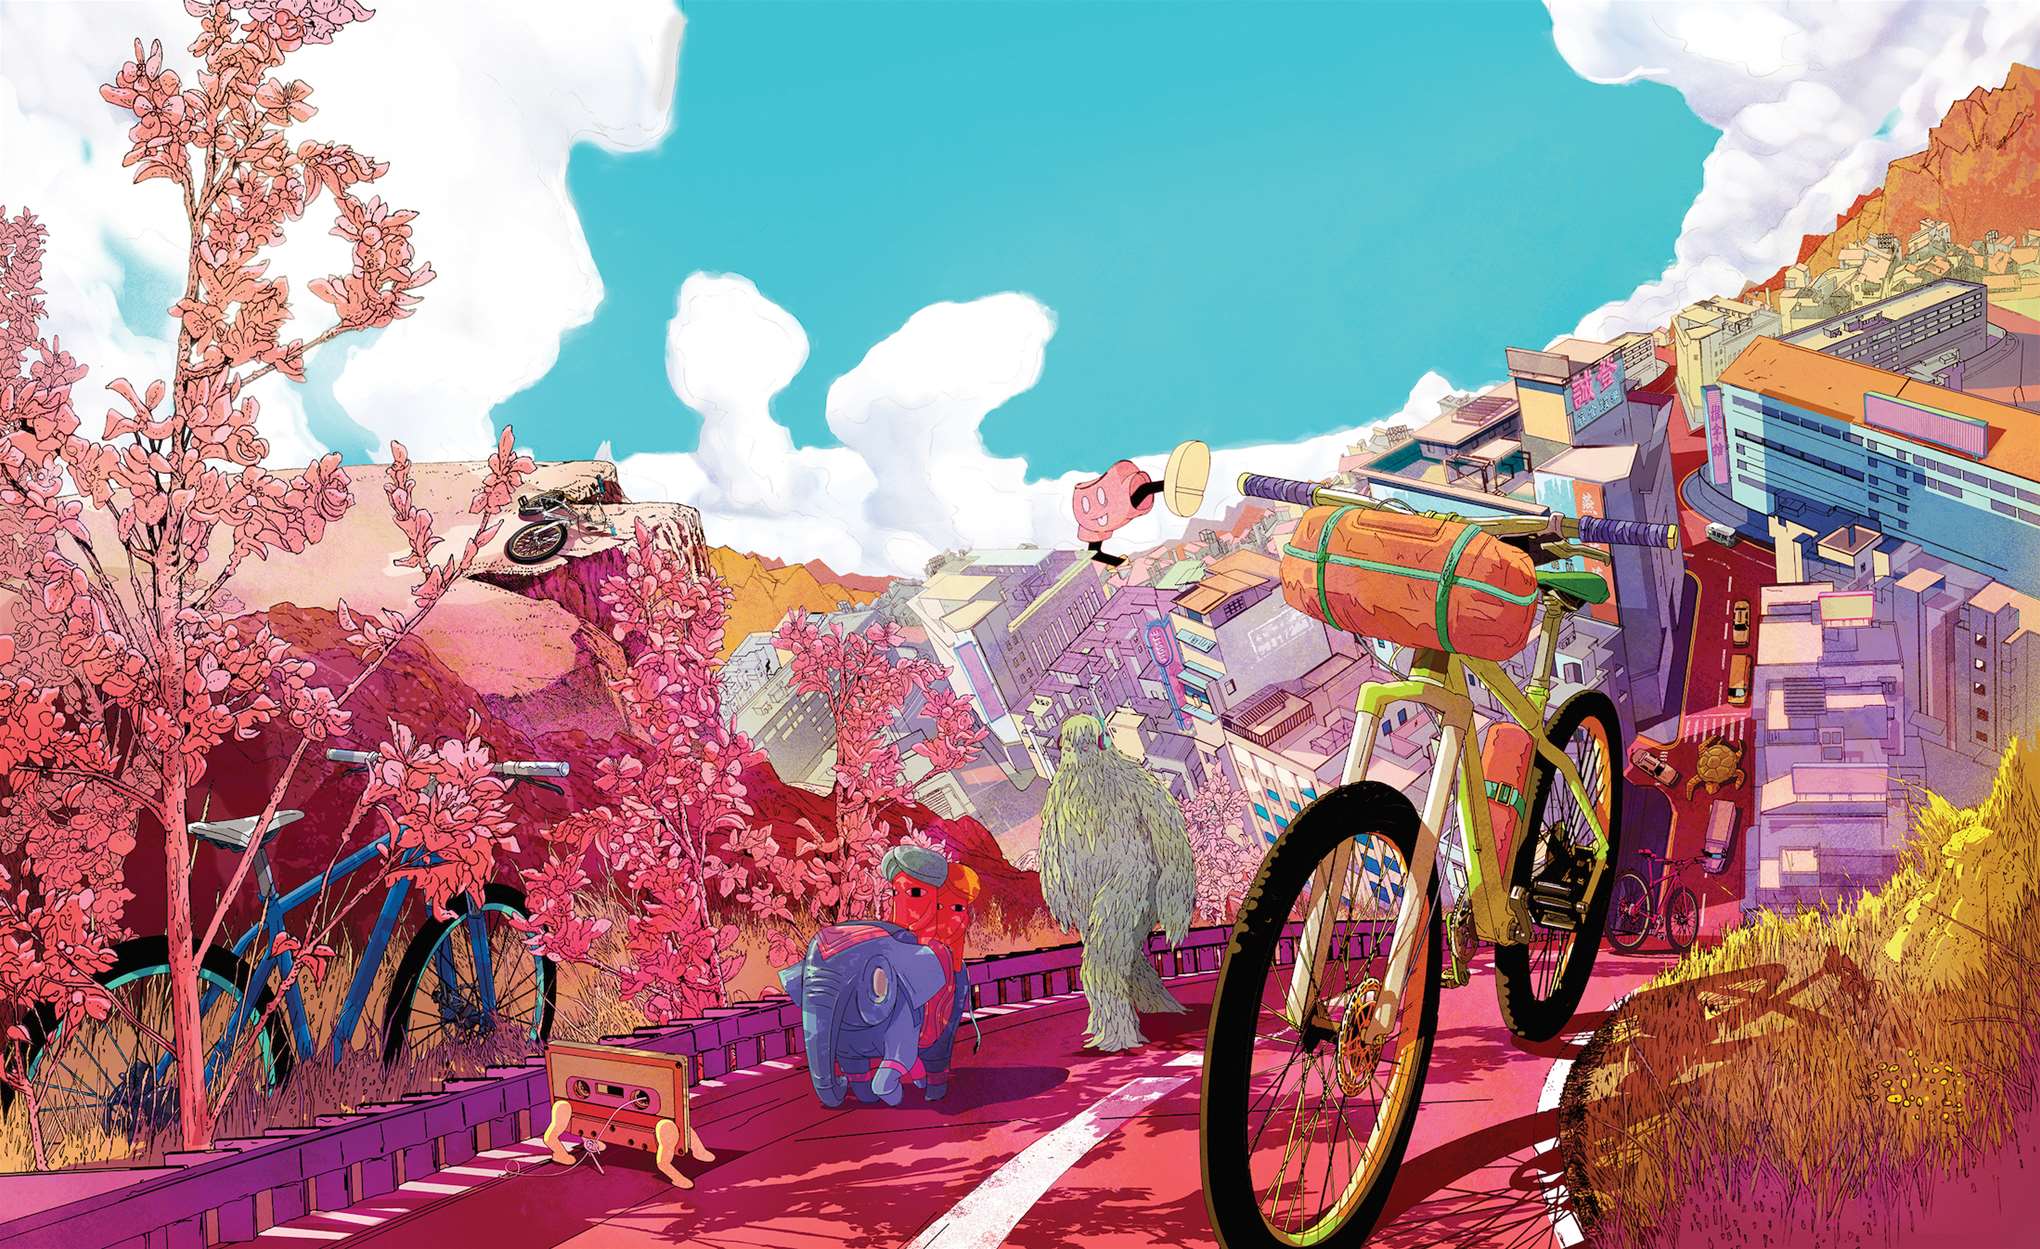 Shan Jiang, Detailed magical universe illustration with bike and fantastical creatures. 